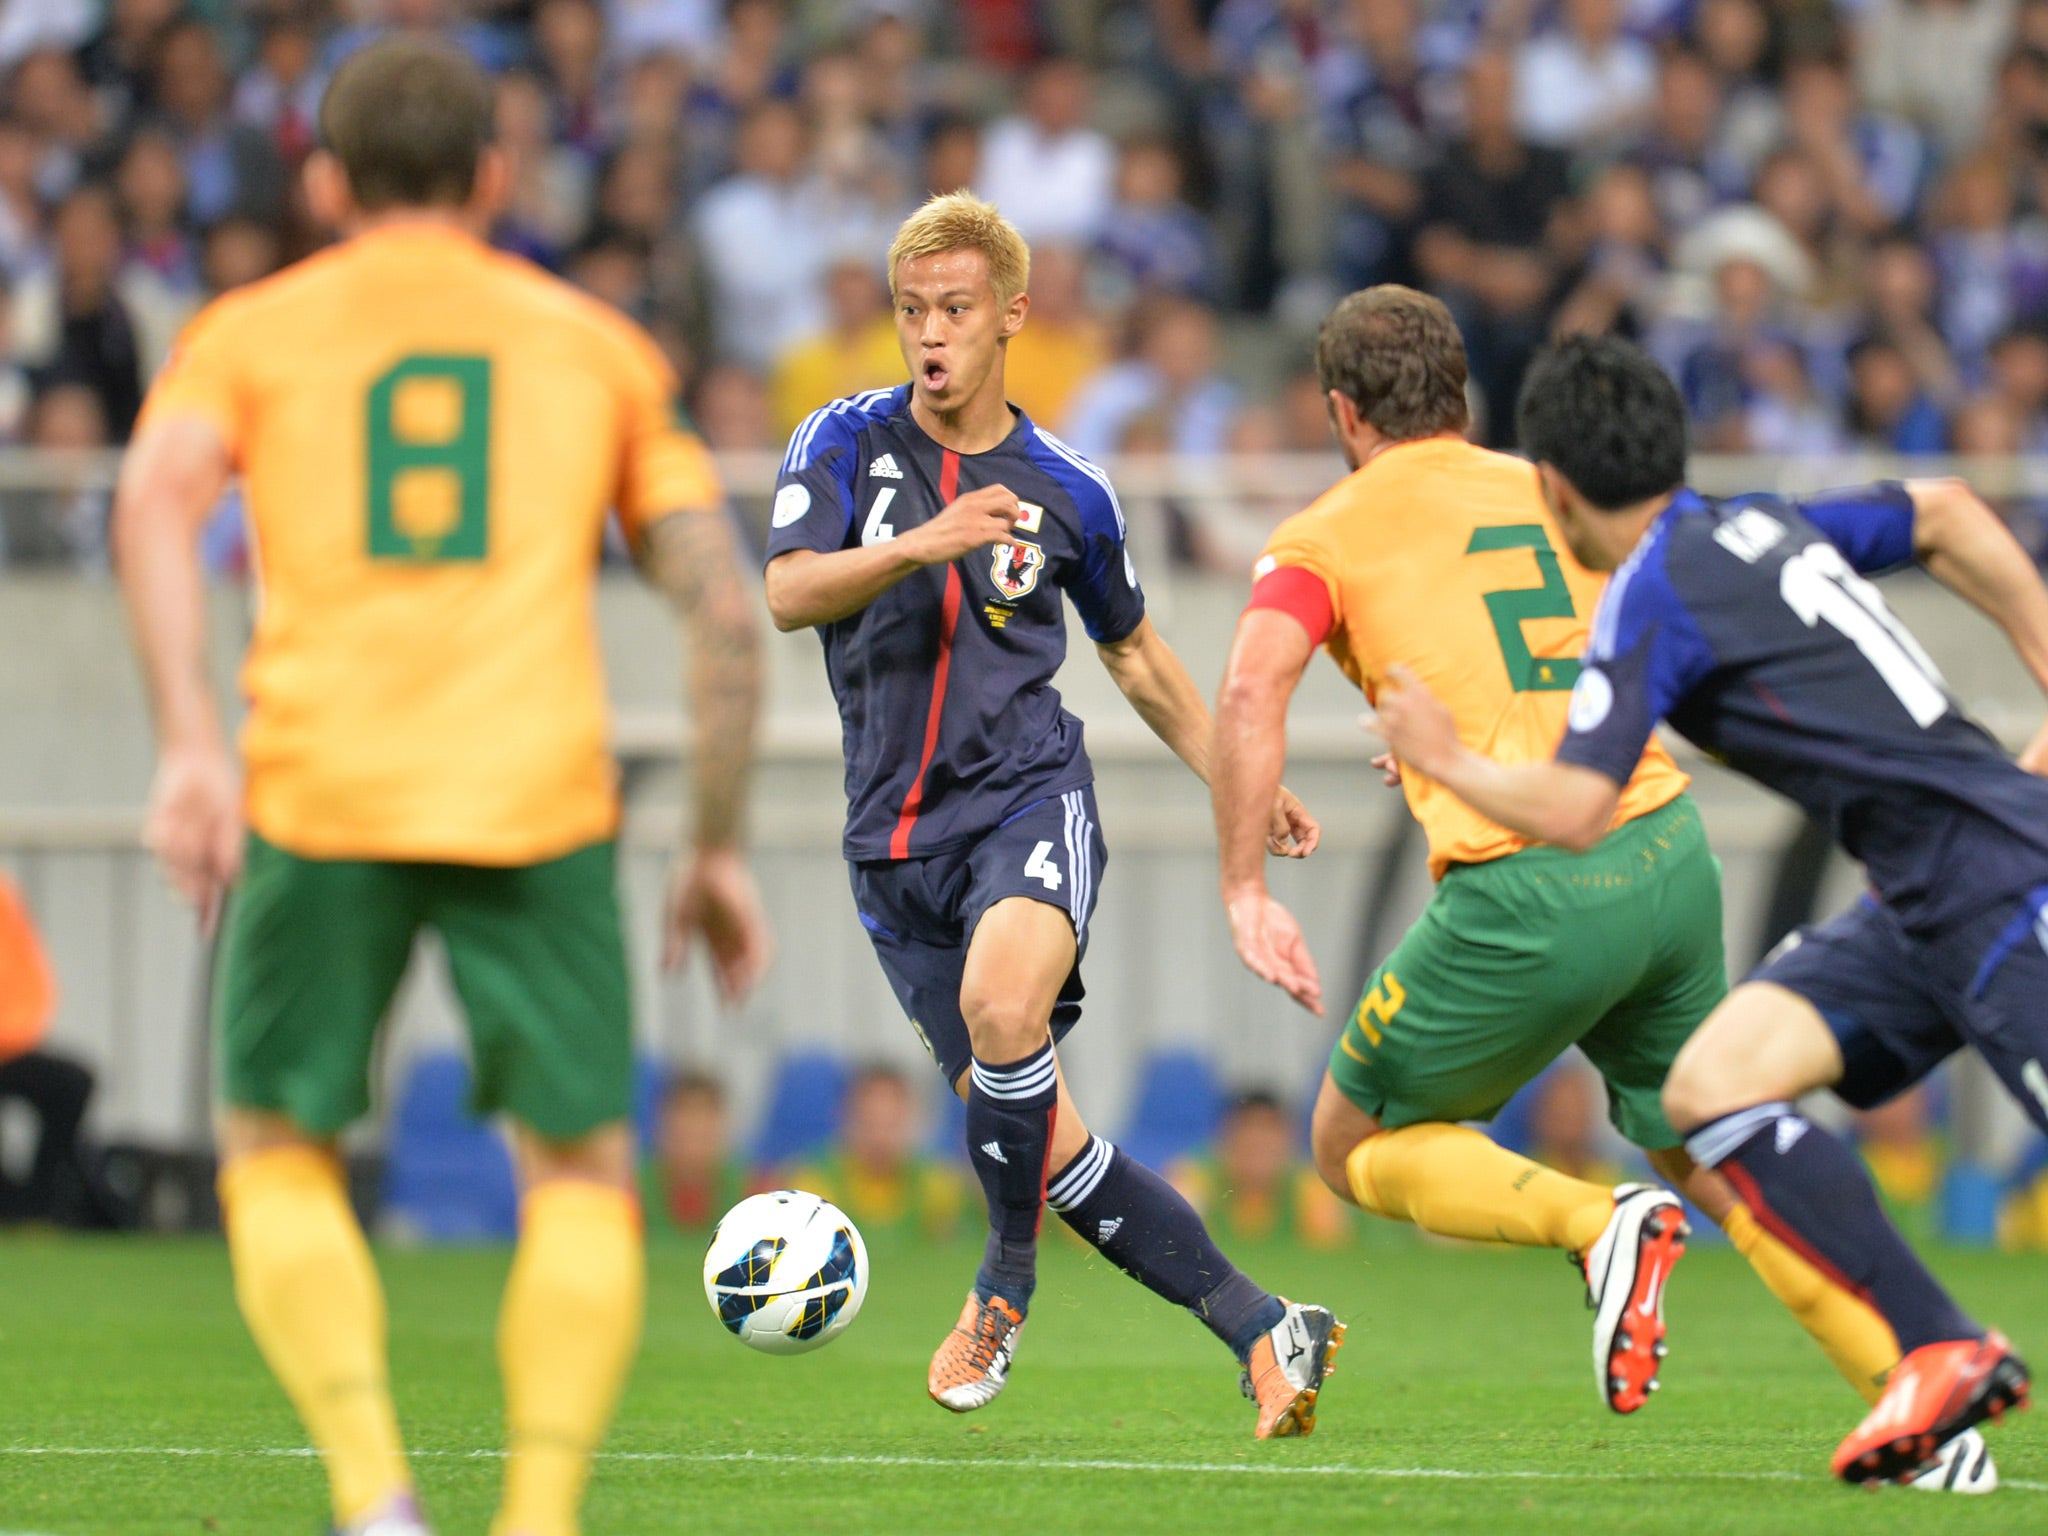 Japan's Keisuke Honda keeps the ball against Australia during the Asian final qualifying round for the 2014 World Cup. Japan drew 1-1 to qualify for next summer's tournament